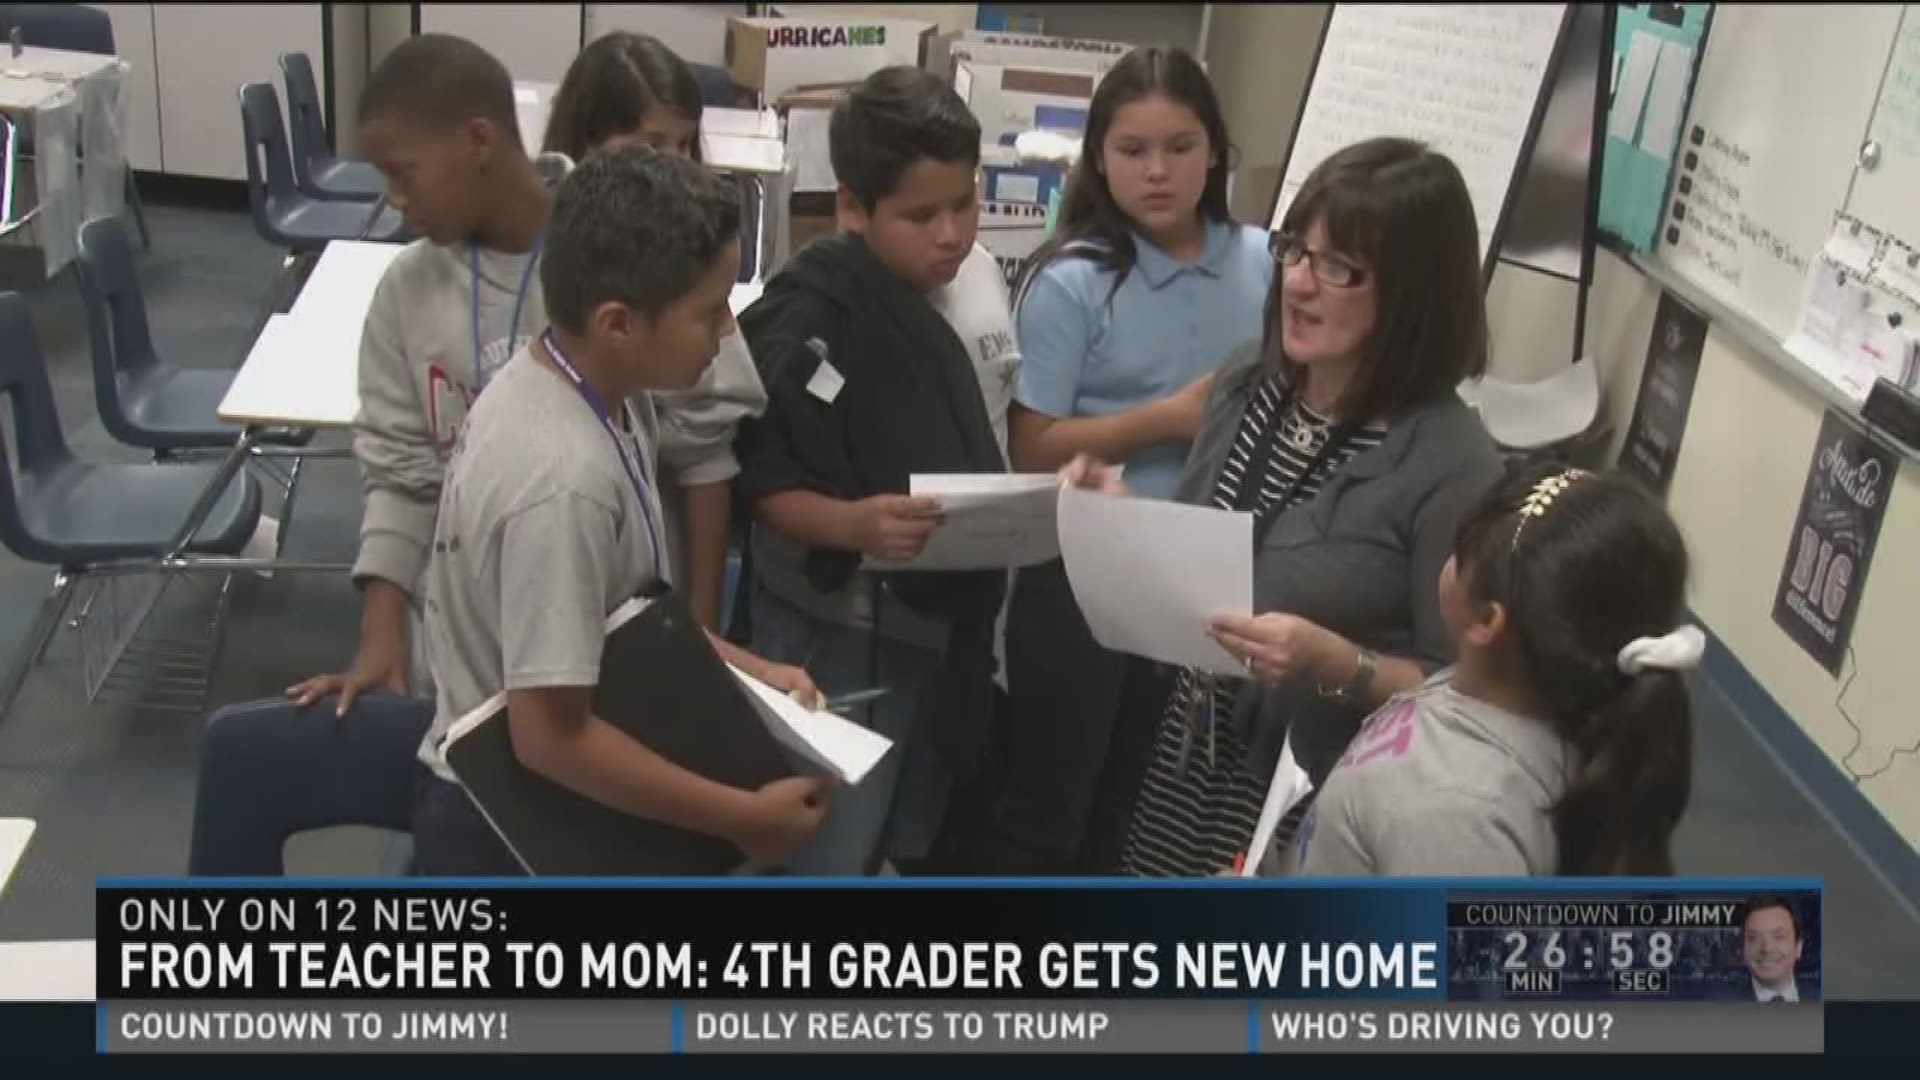 From teacher to mom: 4th grader gets new home